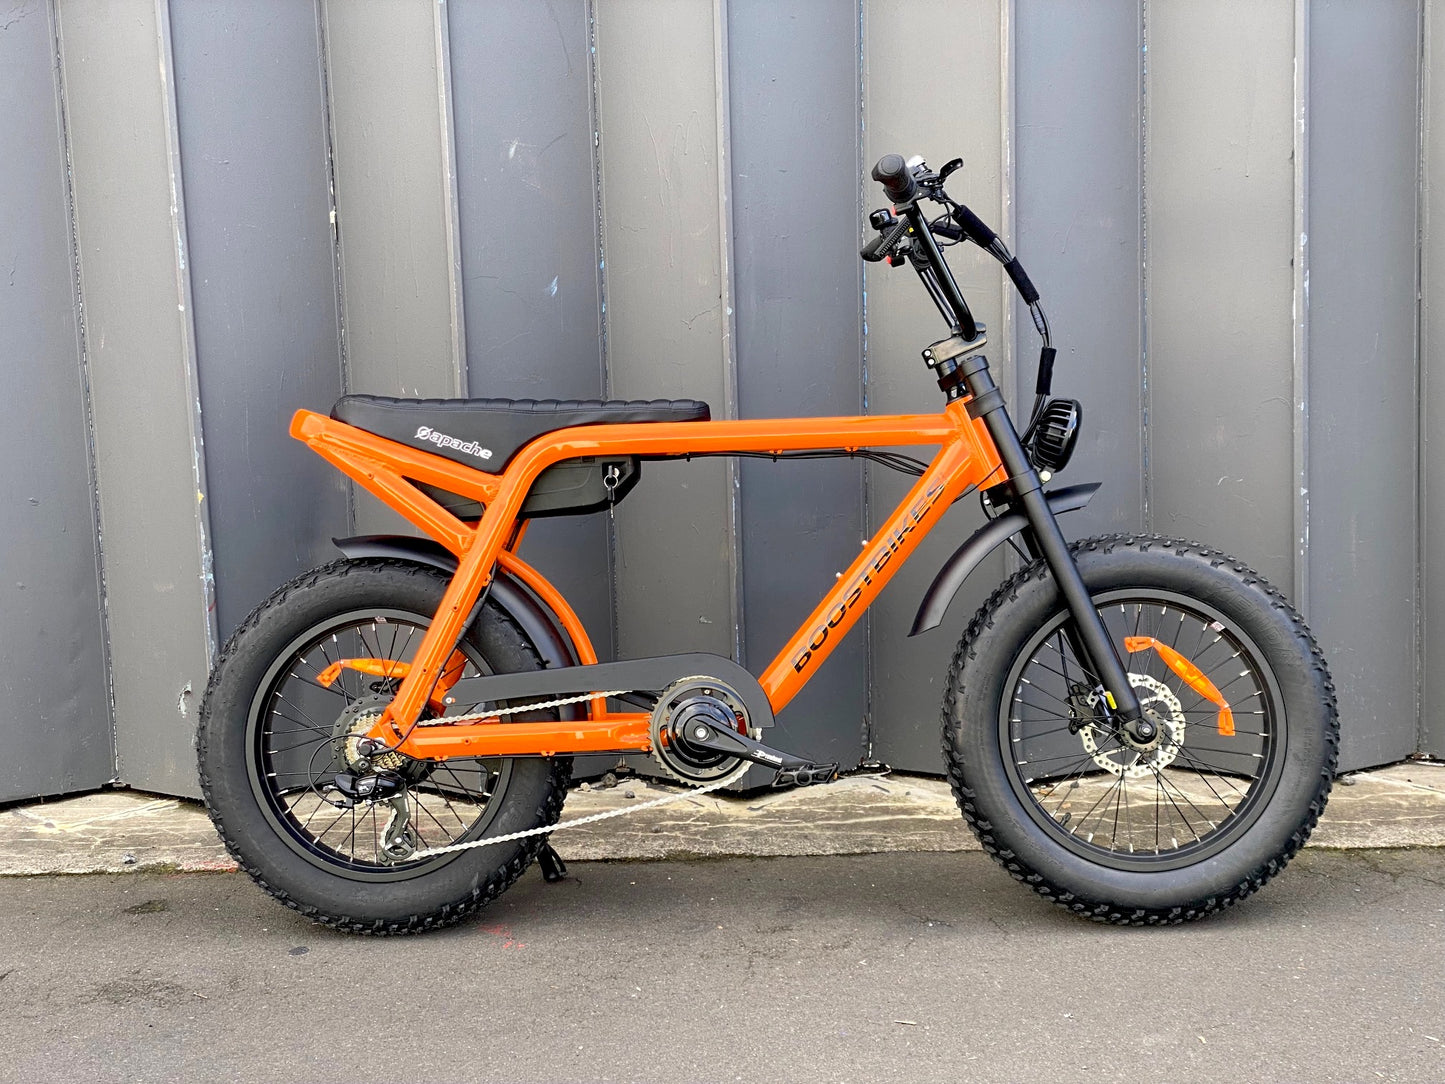 Apache electric Bike, Modern yet retro 20" fat tyre ebike with performance and packed with features in true SUPER 73 style from Boostbikes.